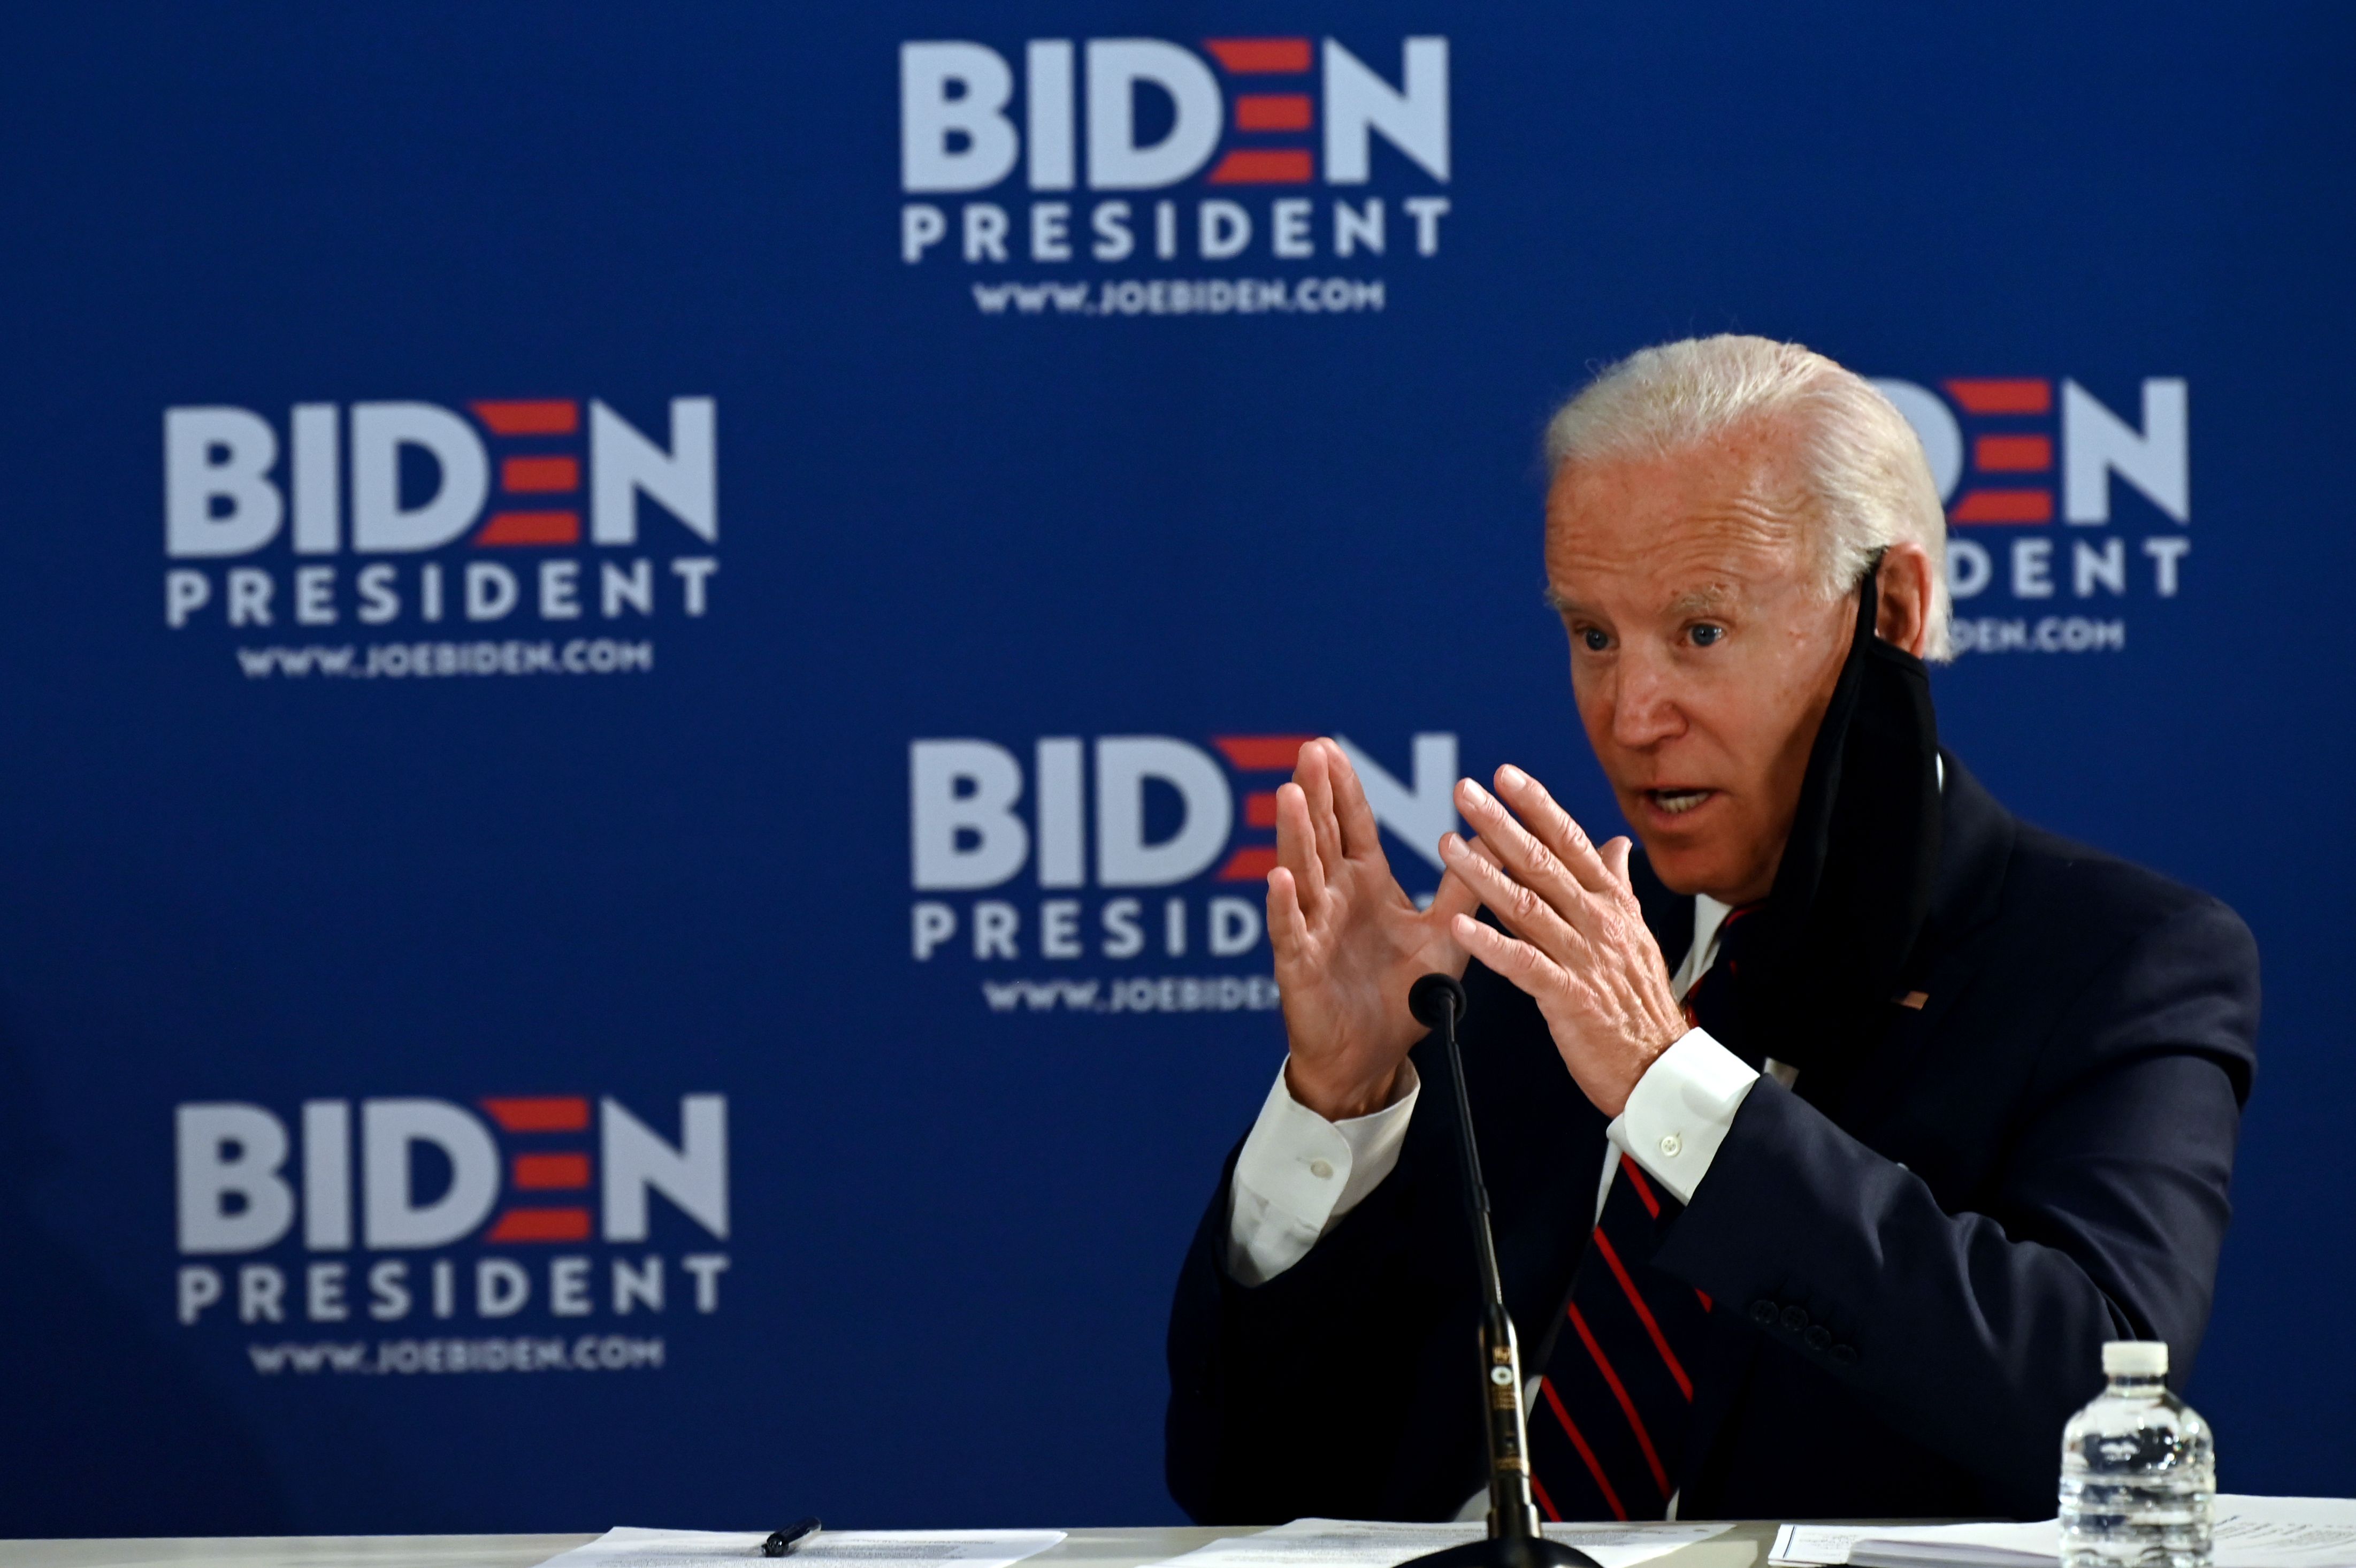 Democratic presidential candidate Joe Biden holds a roundtable meeting on reopening the economy with community leaders at the Enterprise Center in Philadelphia, Pennsylvania, on June 11, 2020. (Photo by JIM WATSON/AFP via Getty Images)